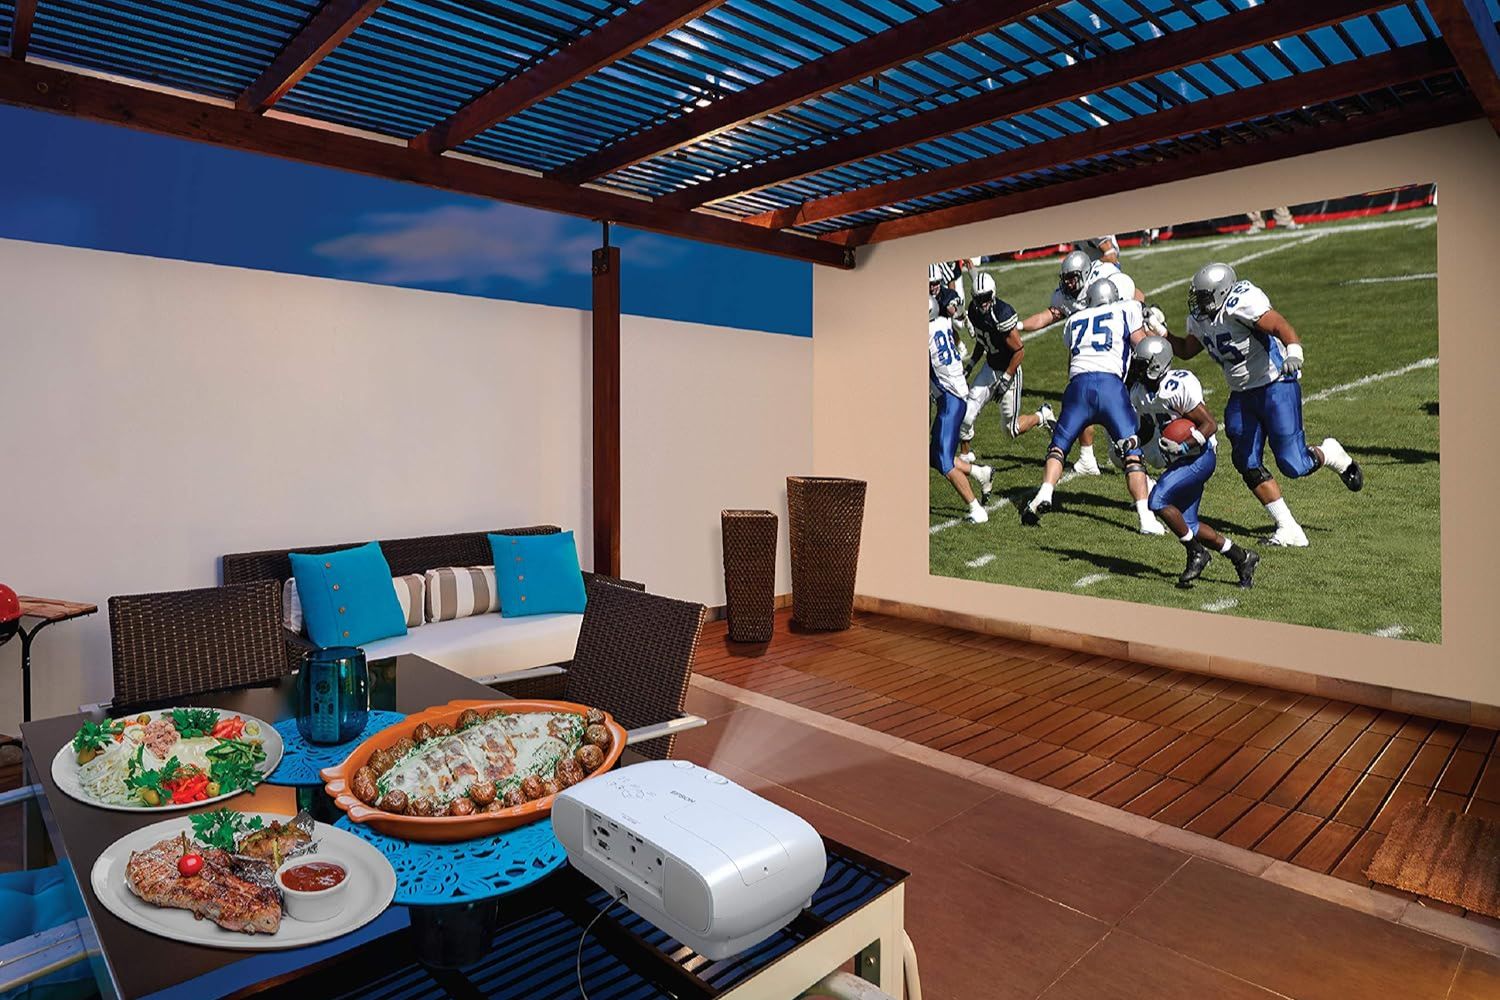 The Best Home Theater Projector set up under a pergola and projecting a football game against a patio wall.